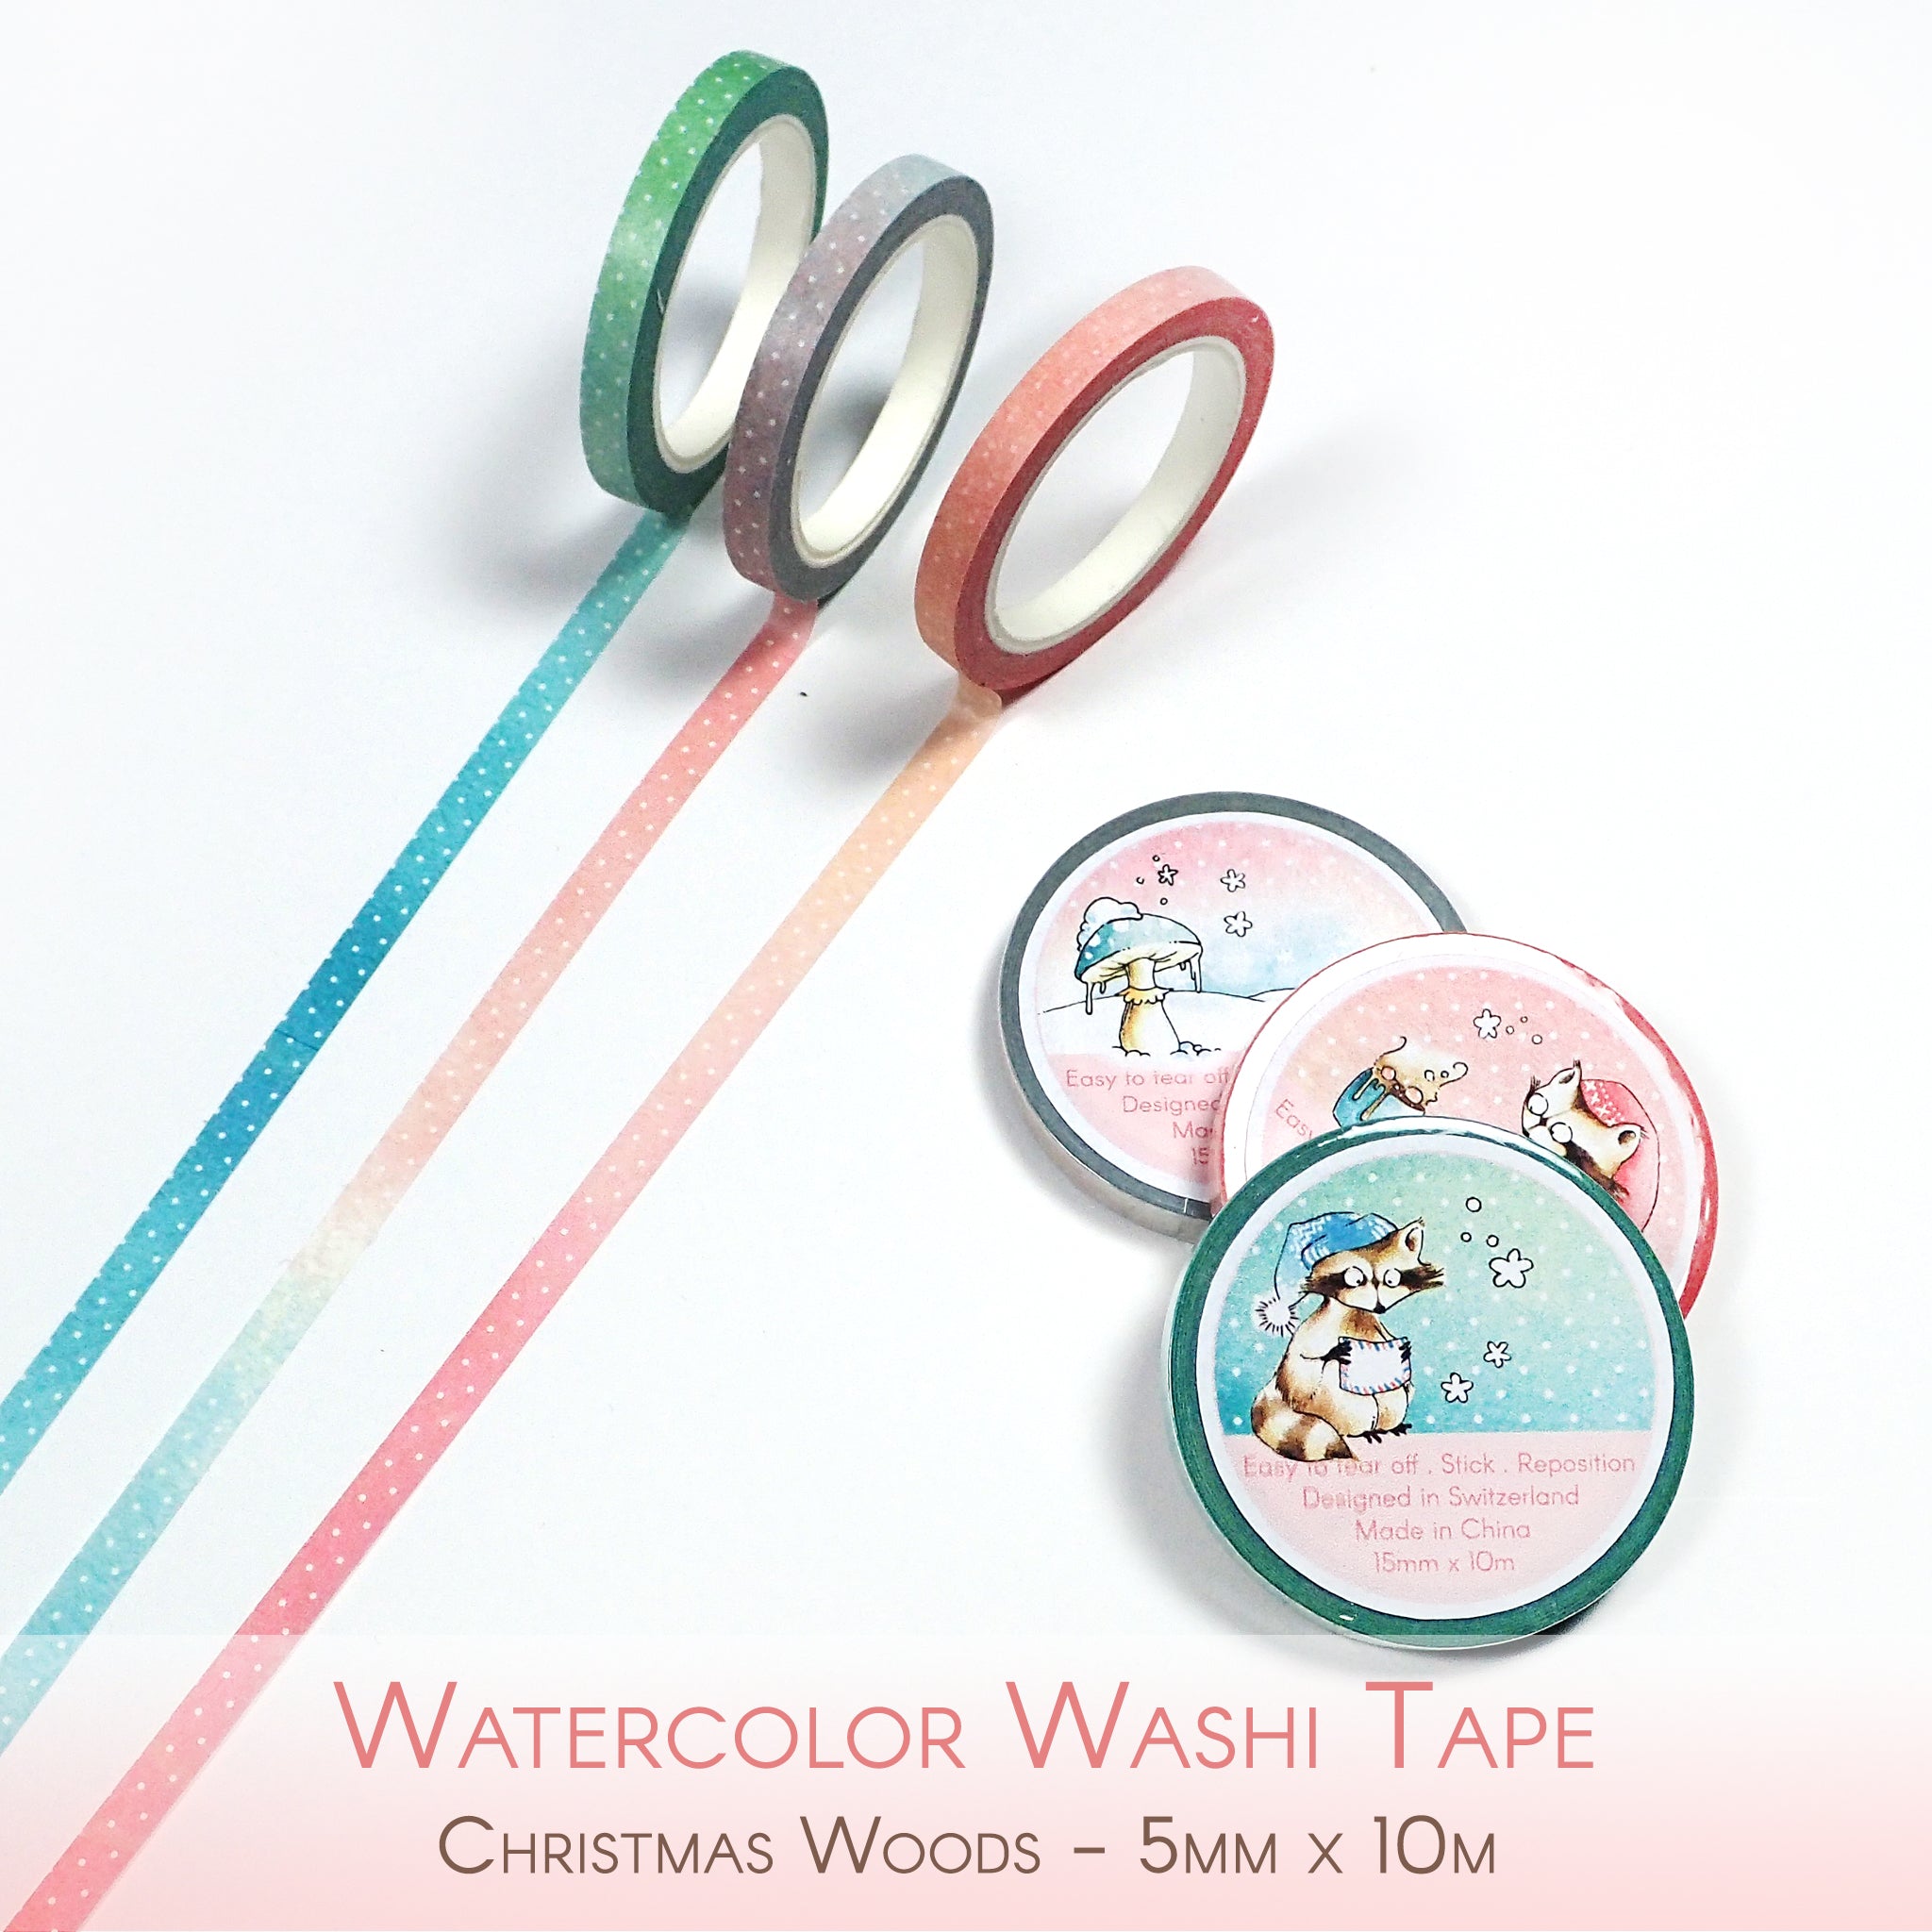 Thin watercolor washi tapes for Christmas Decorations